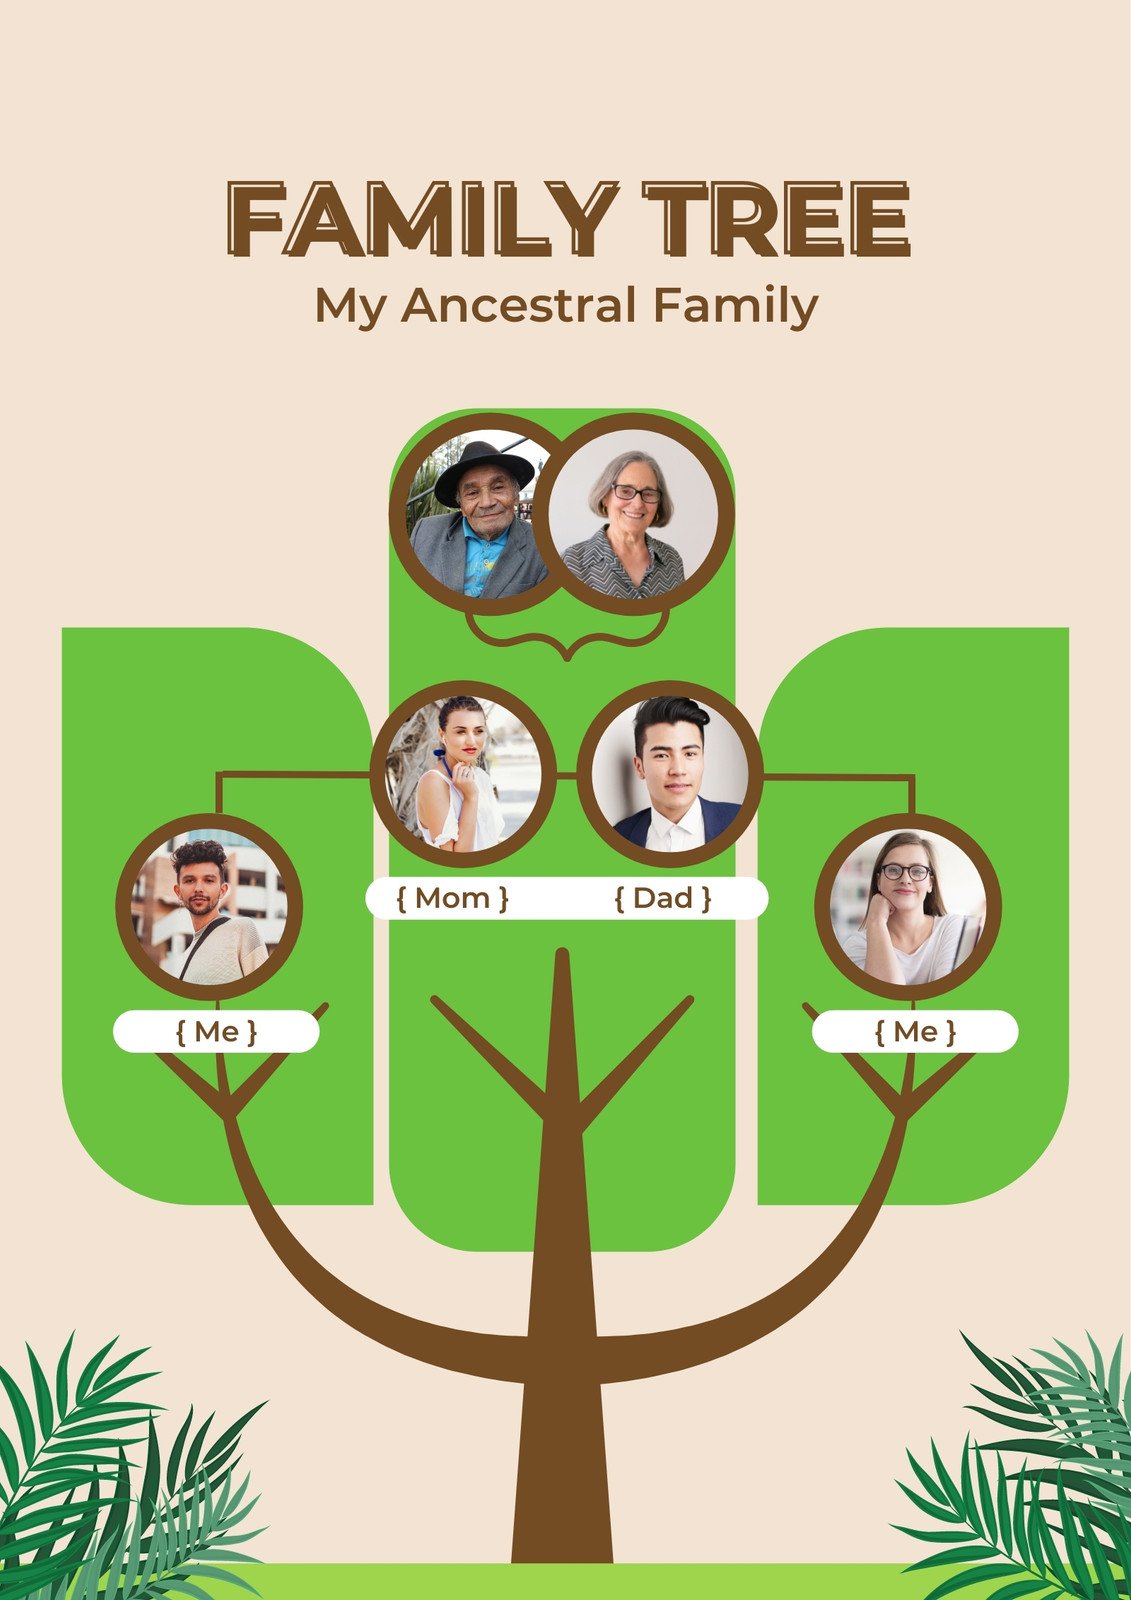 Family Tree for Kids - Getting Them Interested Can Be Challenging